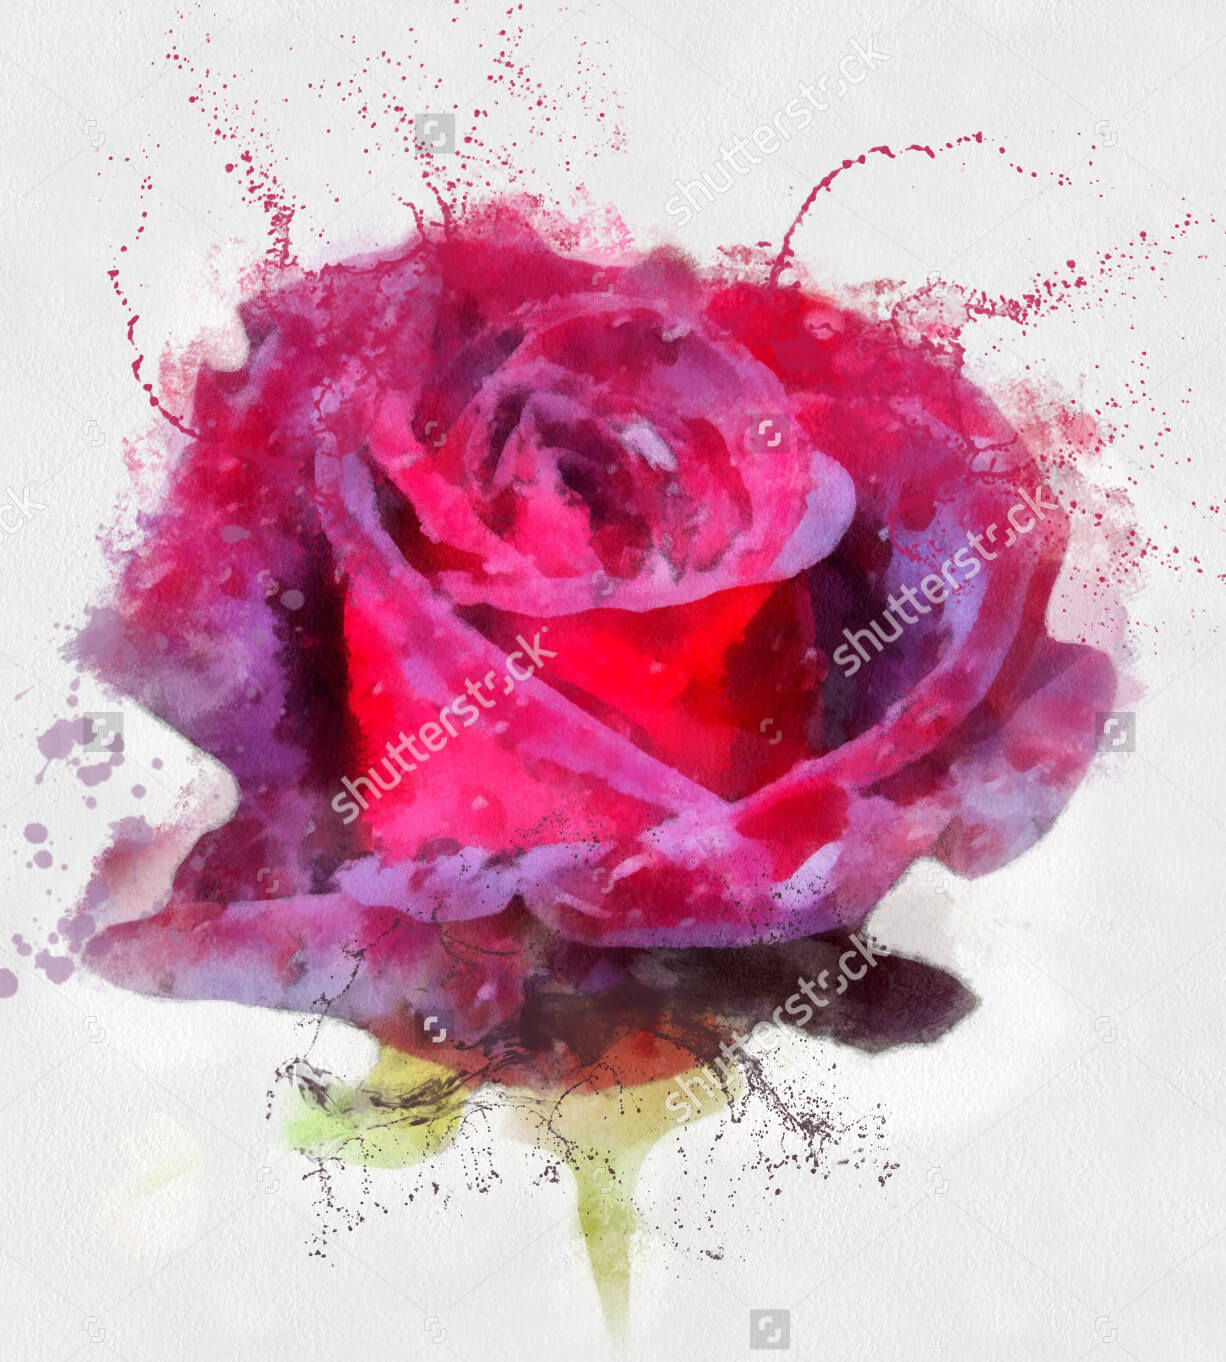 22+ Rose Paintings, Art Ideas, Pictures, Images | Design Trends